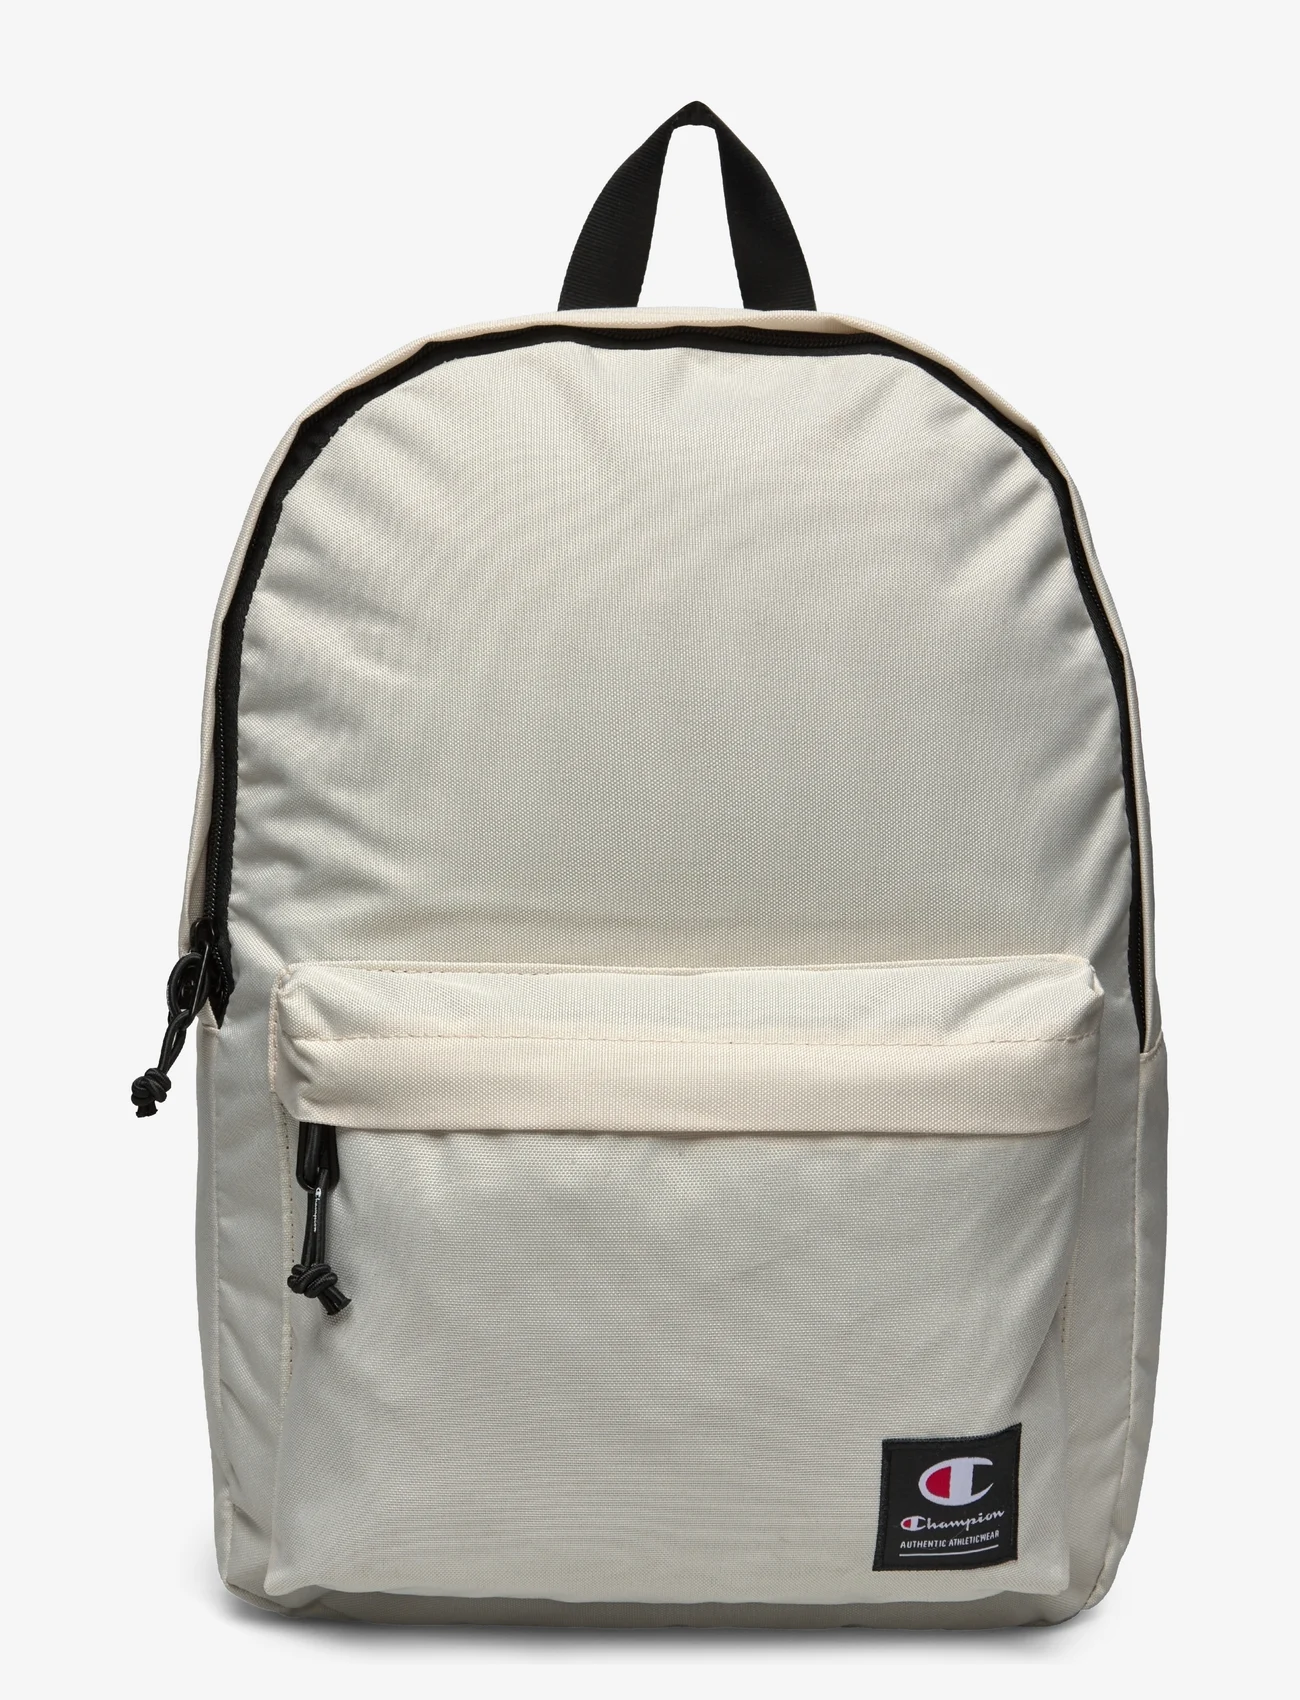 Champion - Backpack - lowest prices - whitecap gray - 0